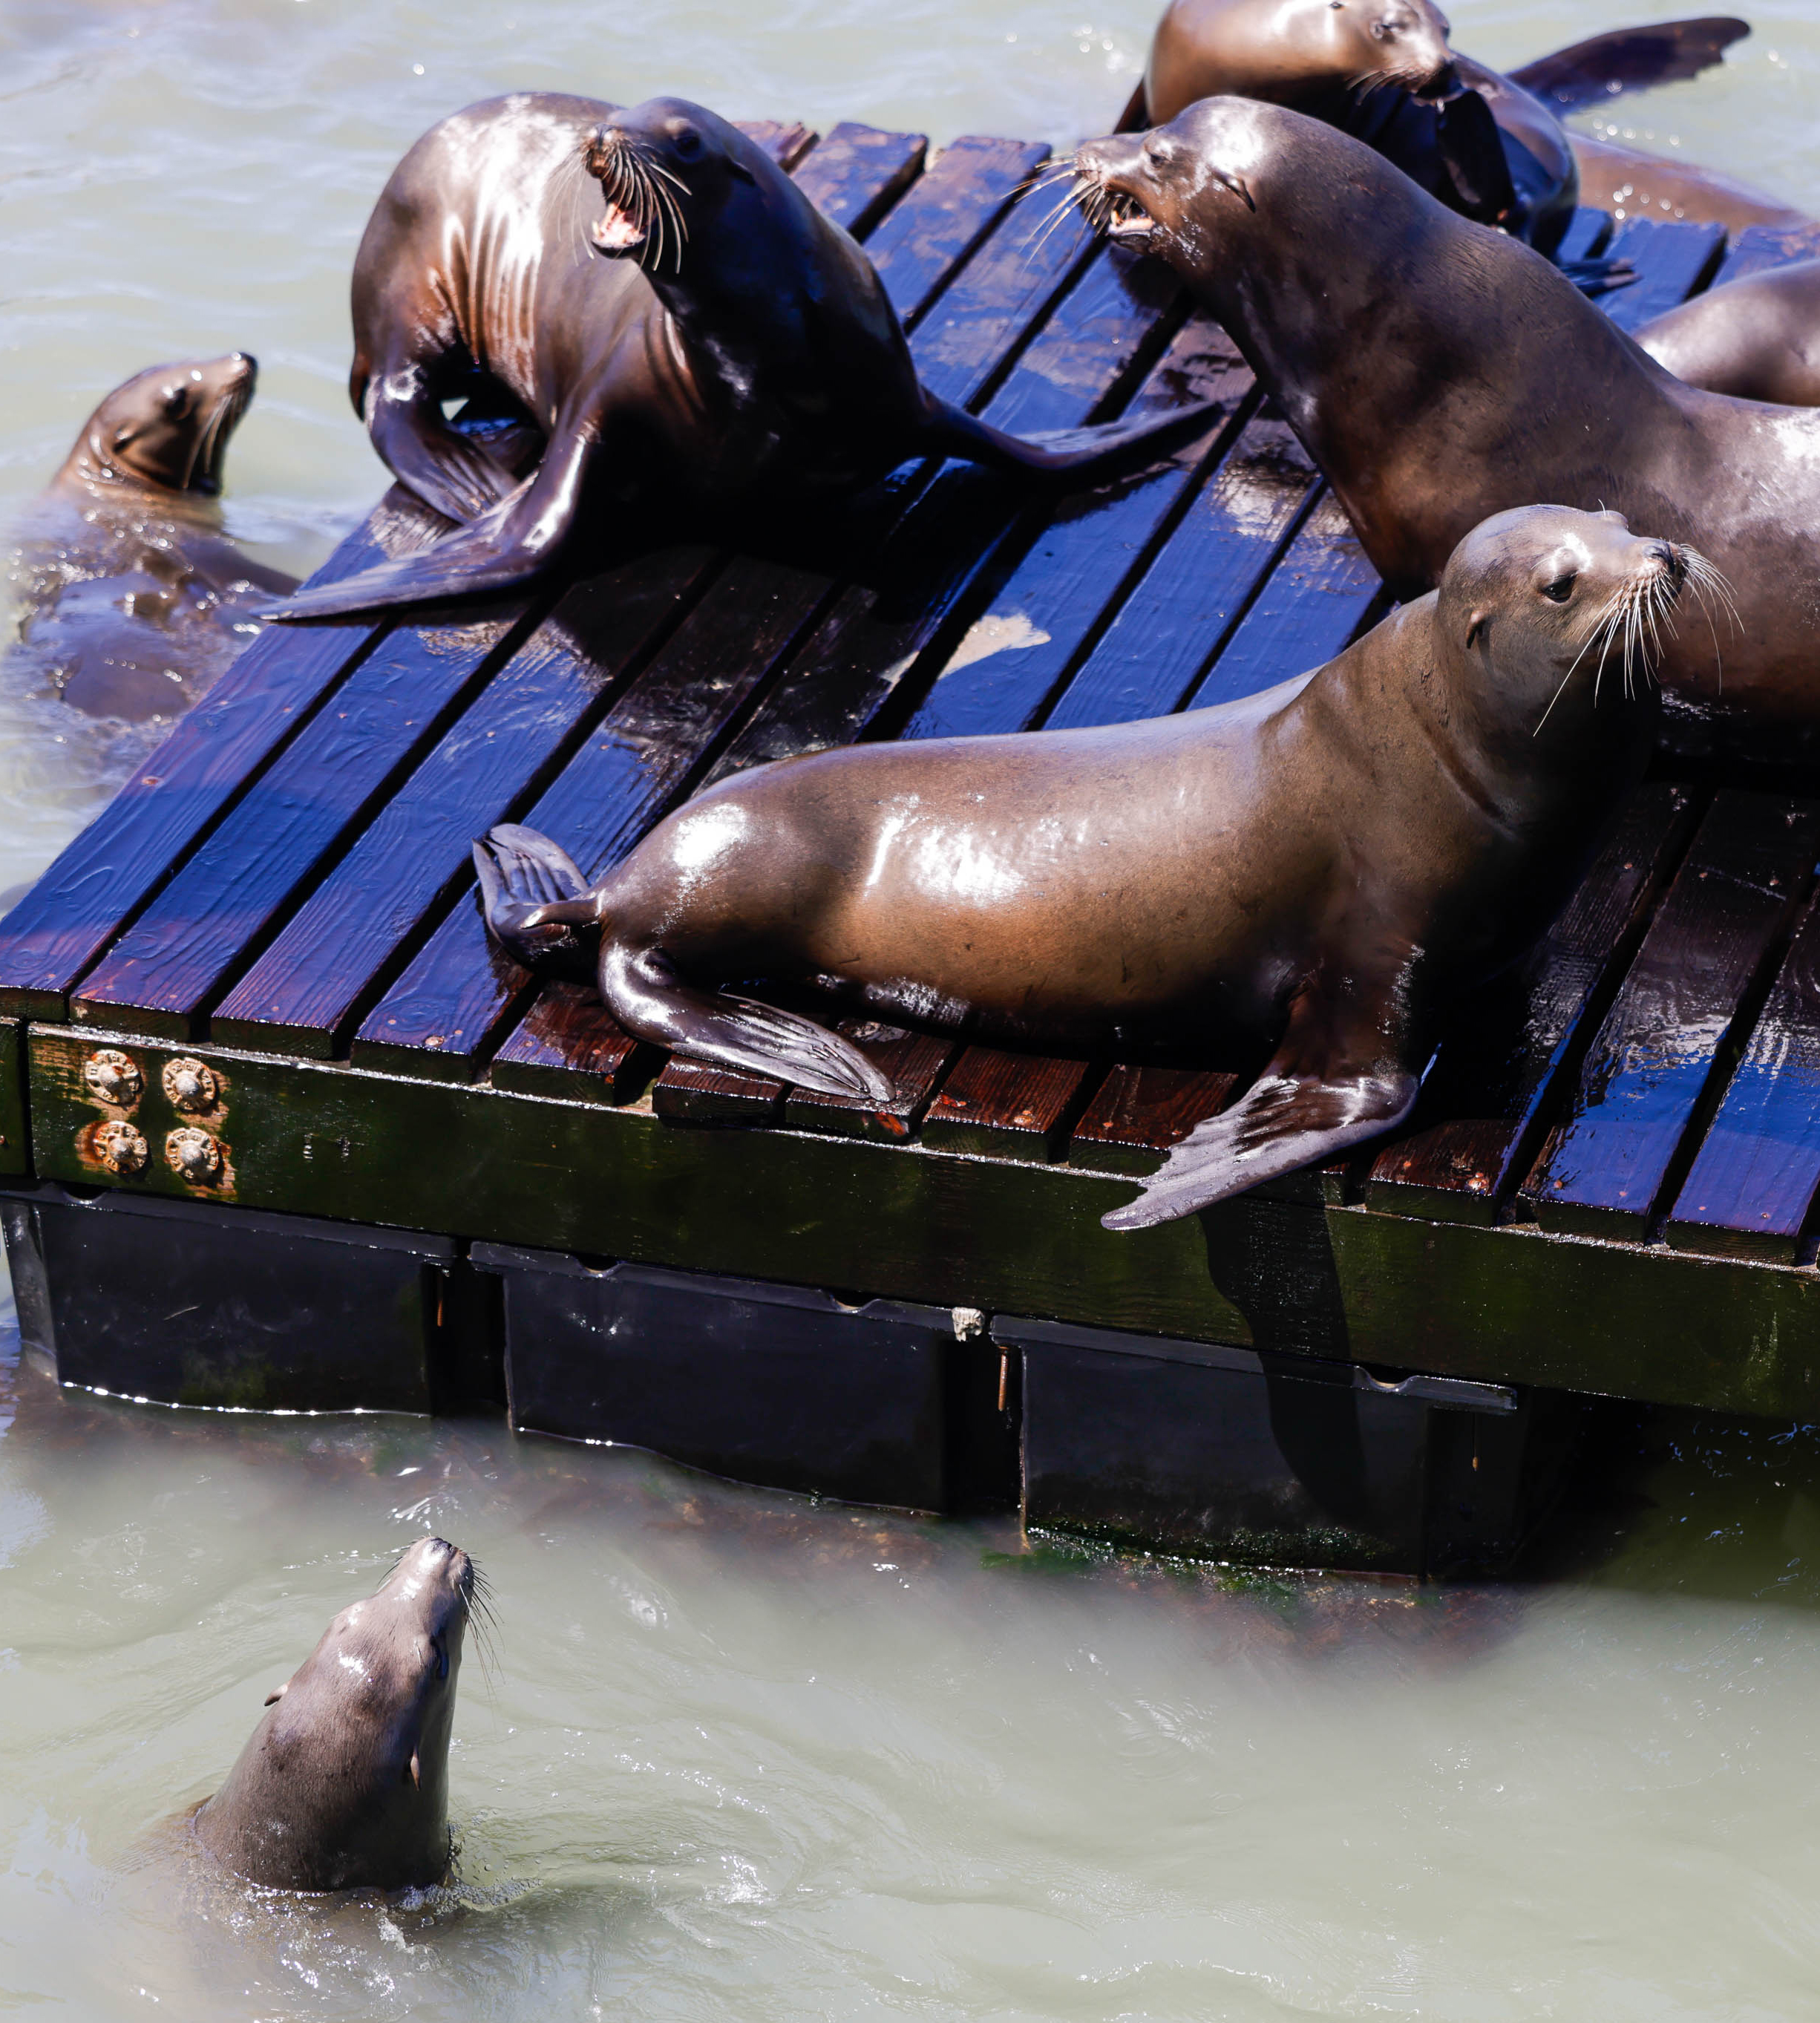 Several sea lions rest on a wooden dock, with one climbing up while another swims nearby.